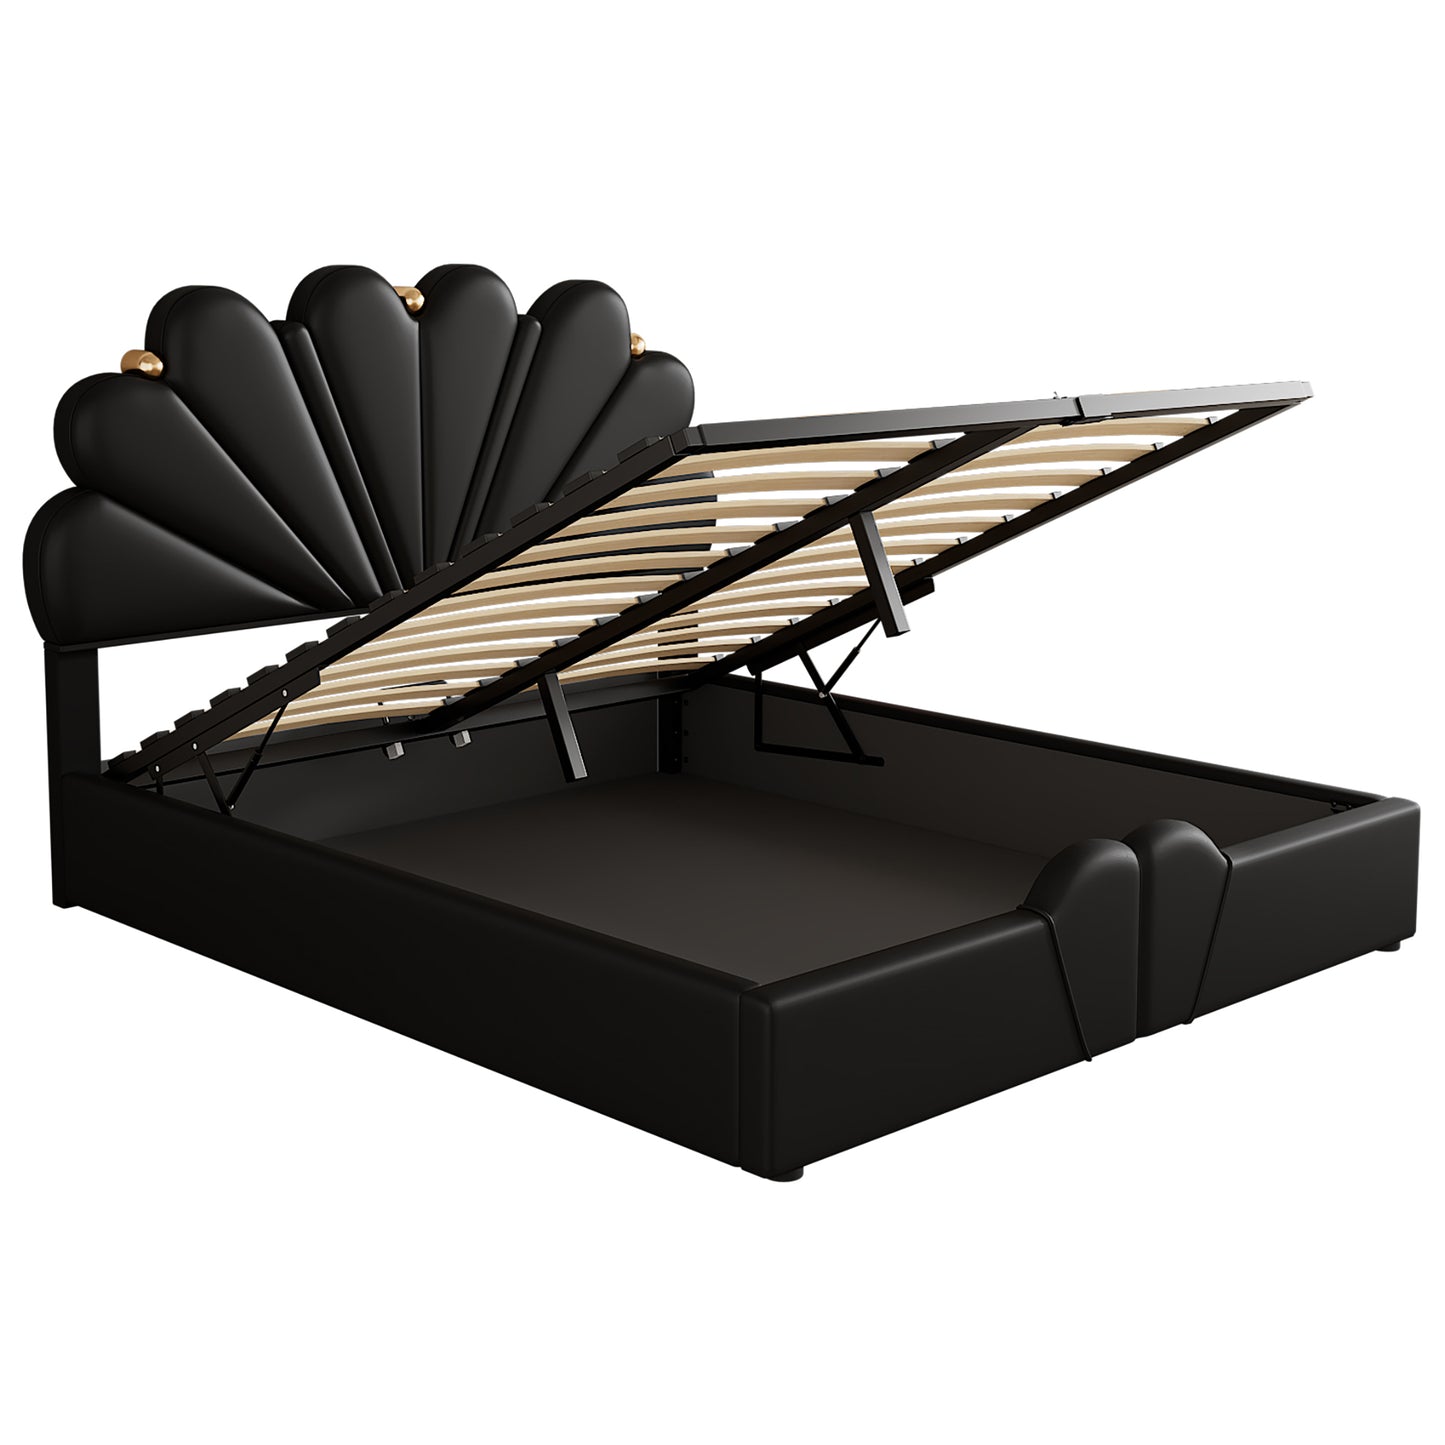 Queen Size Upholstered  Petal Shaped Platform Bed  with Hydraulic Storage System, PU Storage Bed, Decorated with metal balls, Black